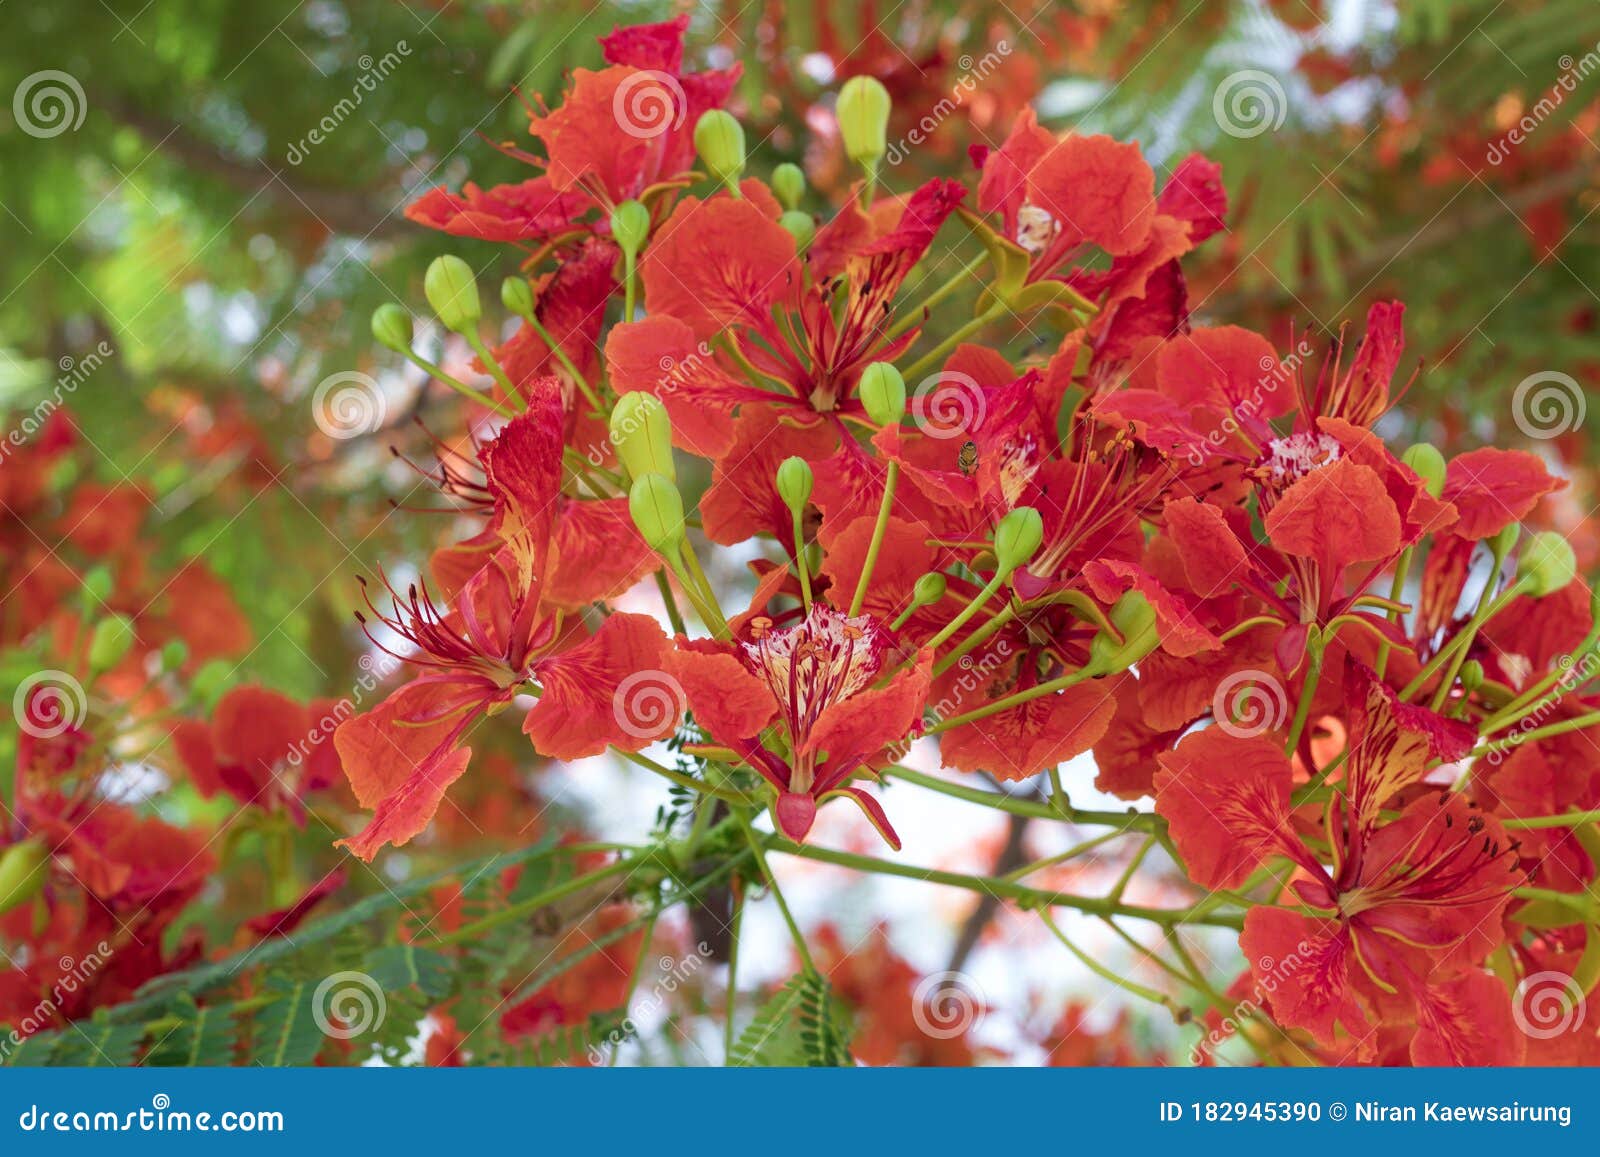 575 Gulmohar Flowers Photos Free Royalty Free Stock Photos From Dreamstime